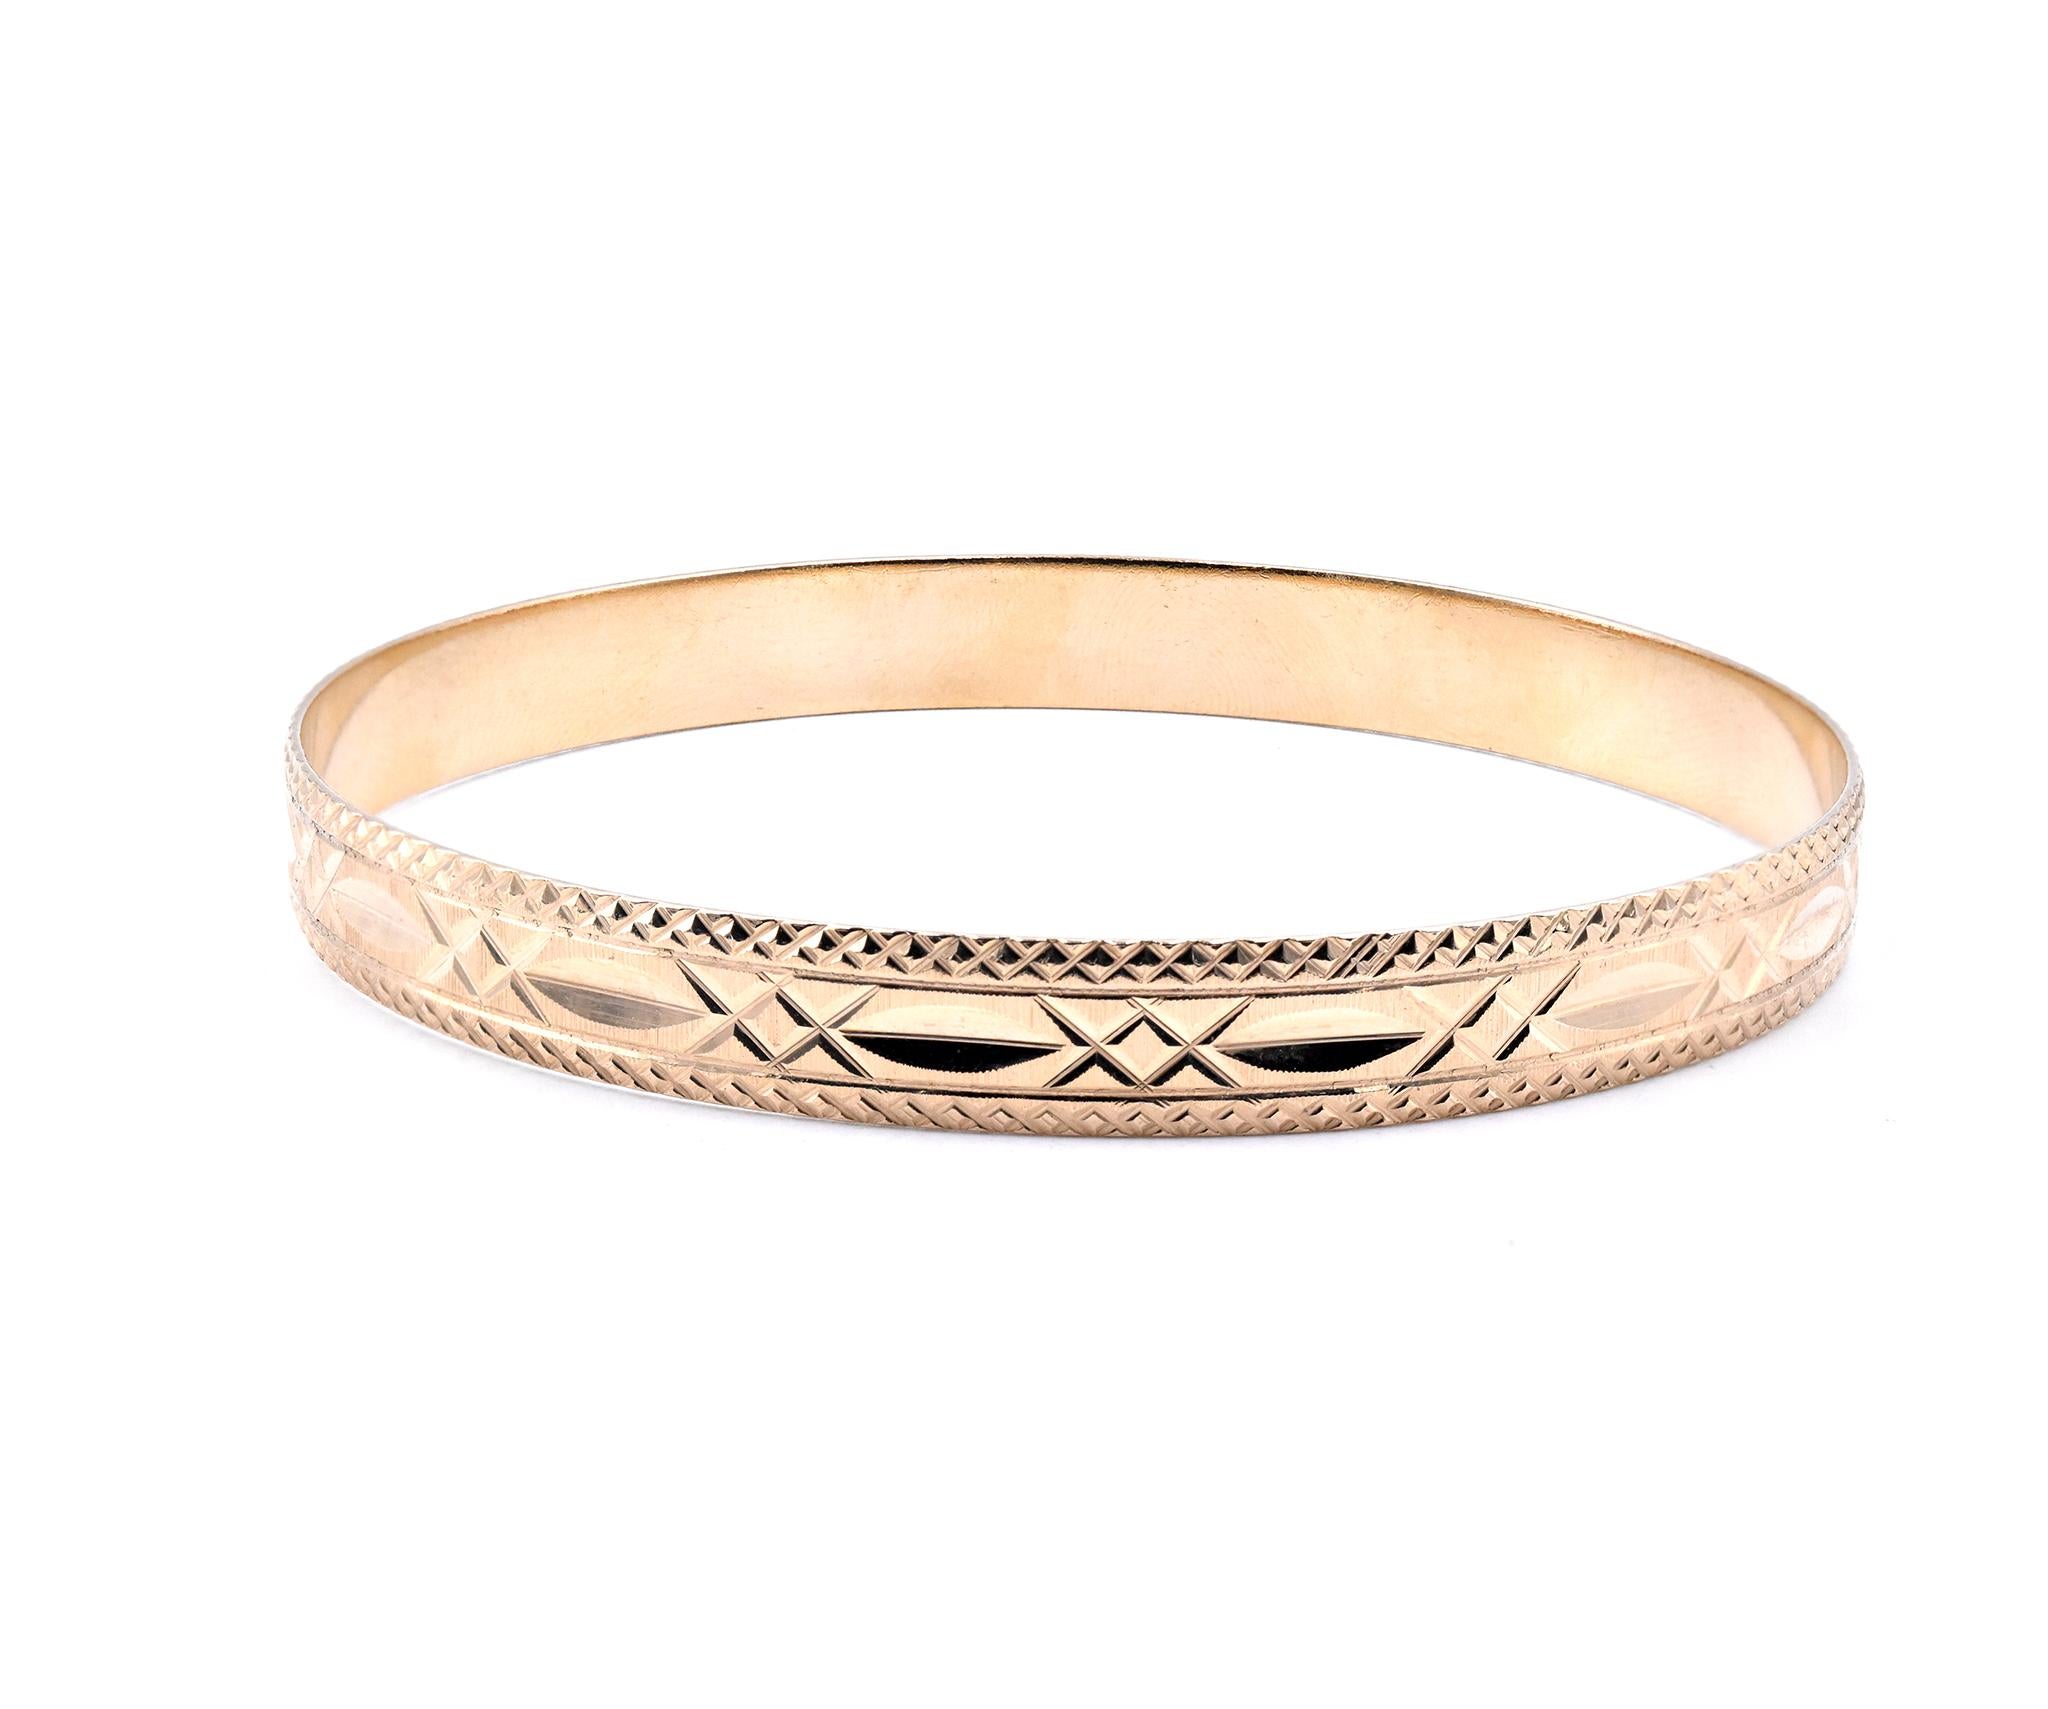 Designer: custom
Material: 10K yellow gold
Dimensions: bracelet will fit up to a 8-Inch wrist
Weight: 17.67 grams
